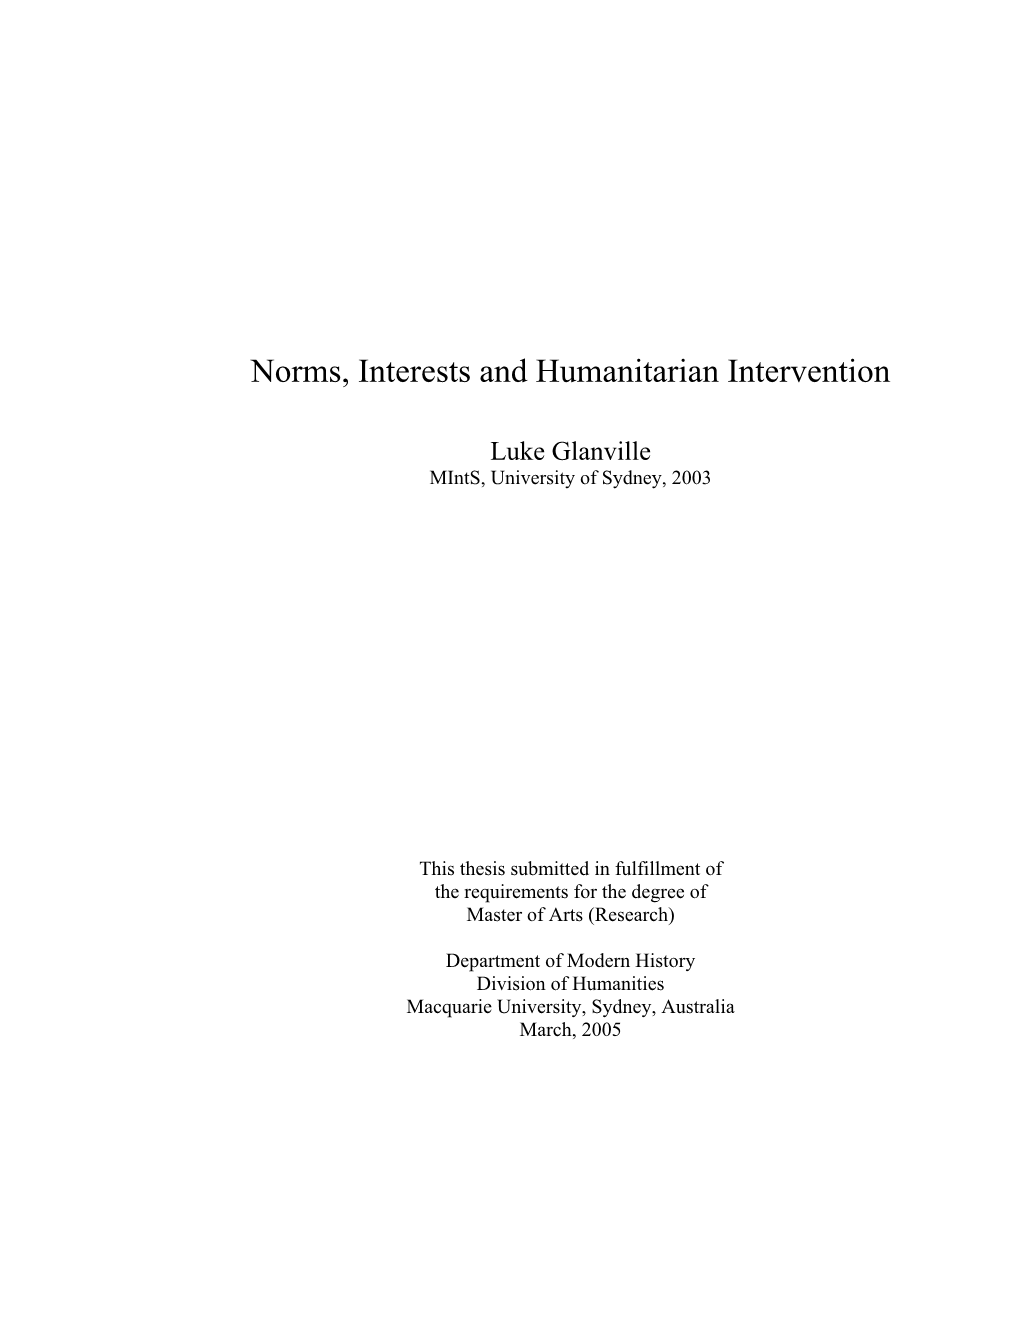 Norms, Interests and Humanitarian Intervention